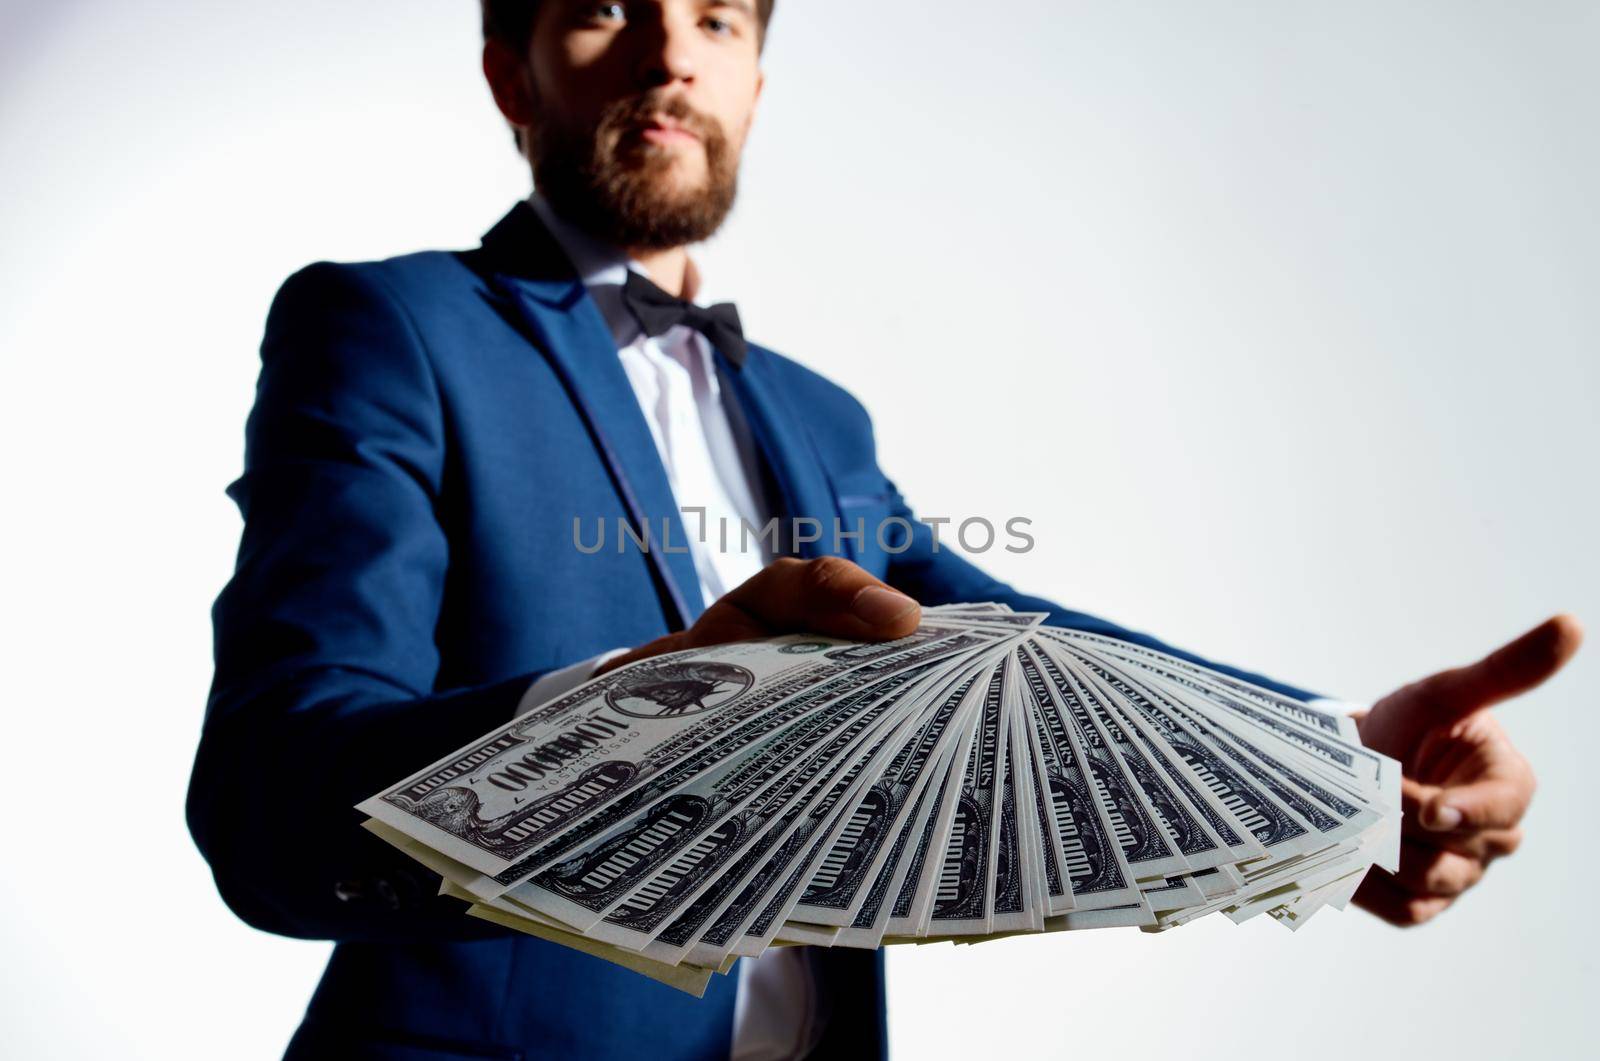 rich guy with a stack of bills money classic suit gesturing with his hands. High quality photo